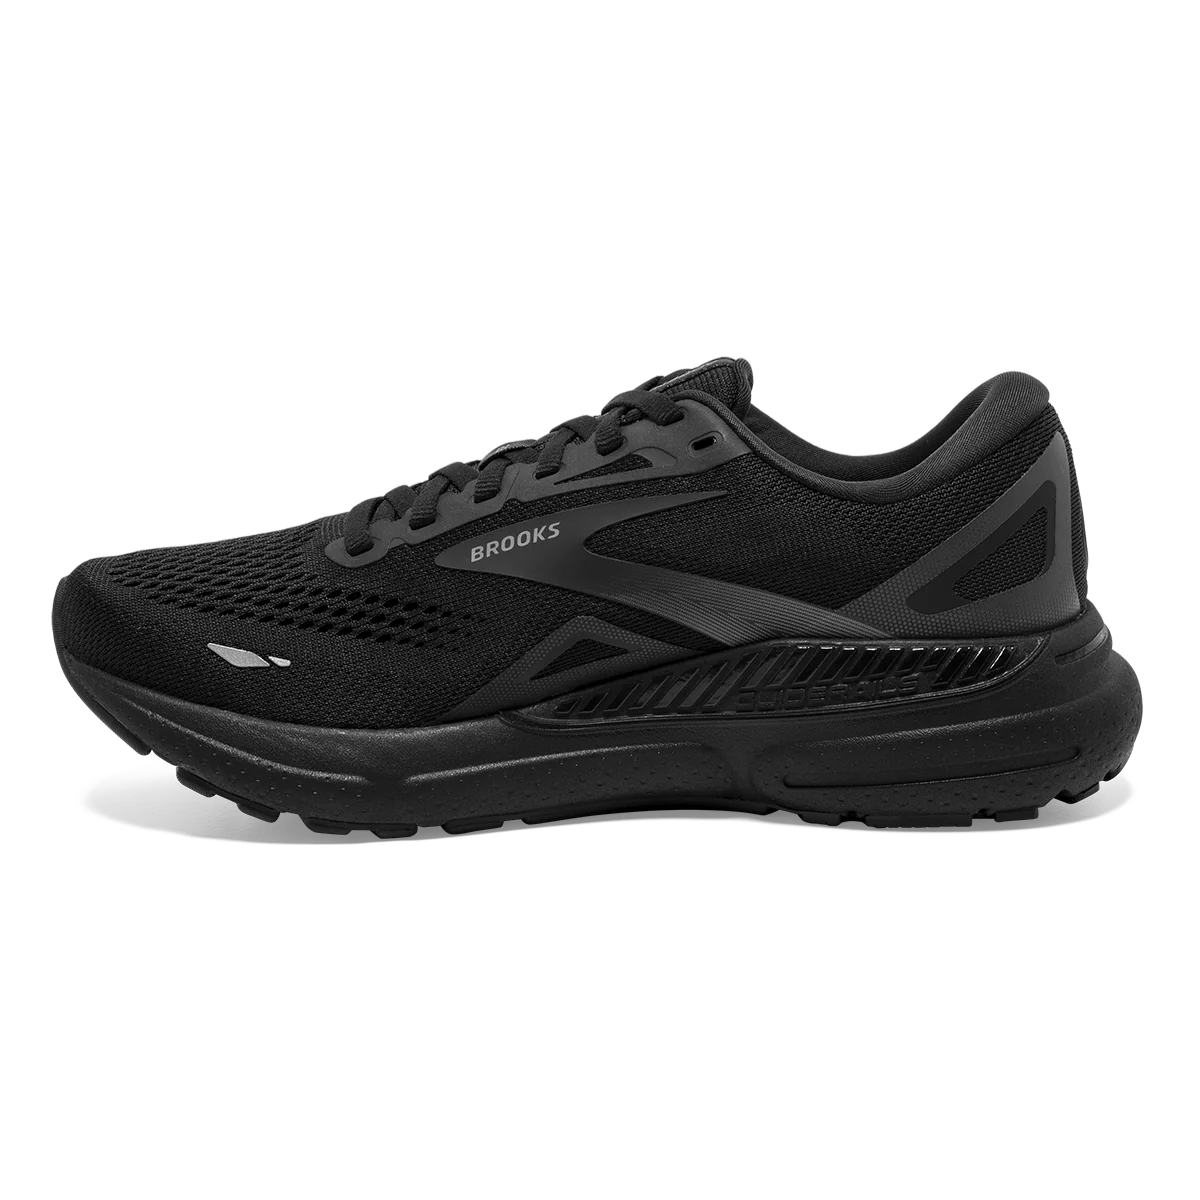 Medial view of the Men's Adrenaline GTS by Brooks in the wide 2E width, color Black/Black/Ebony